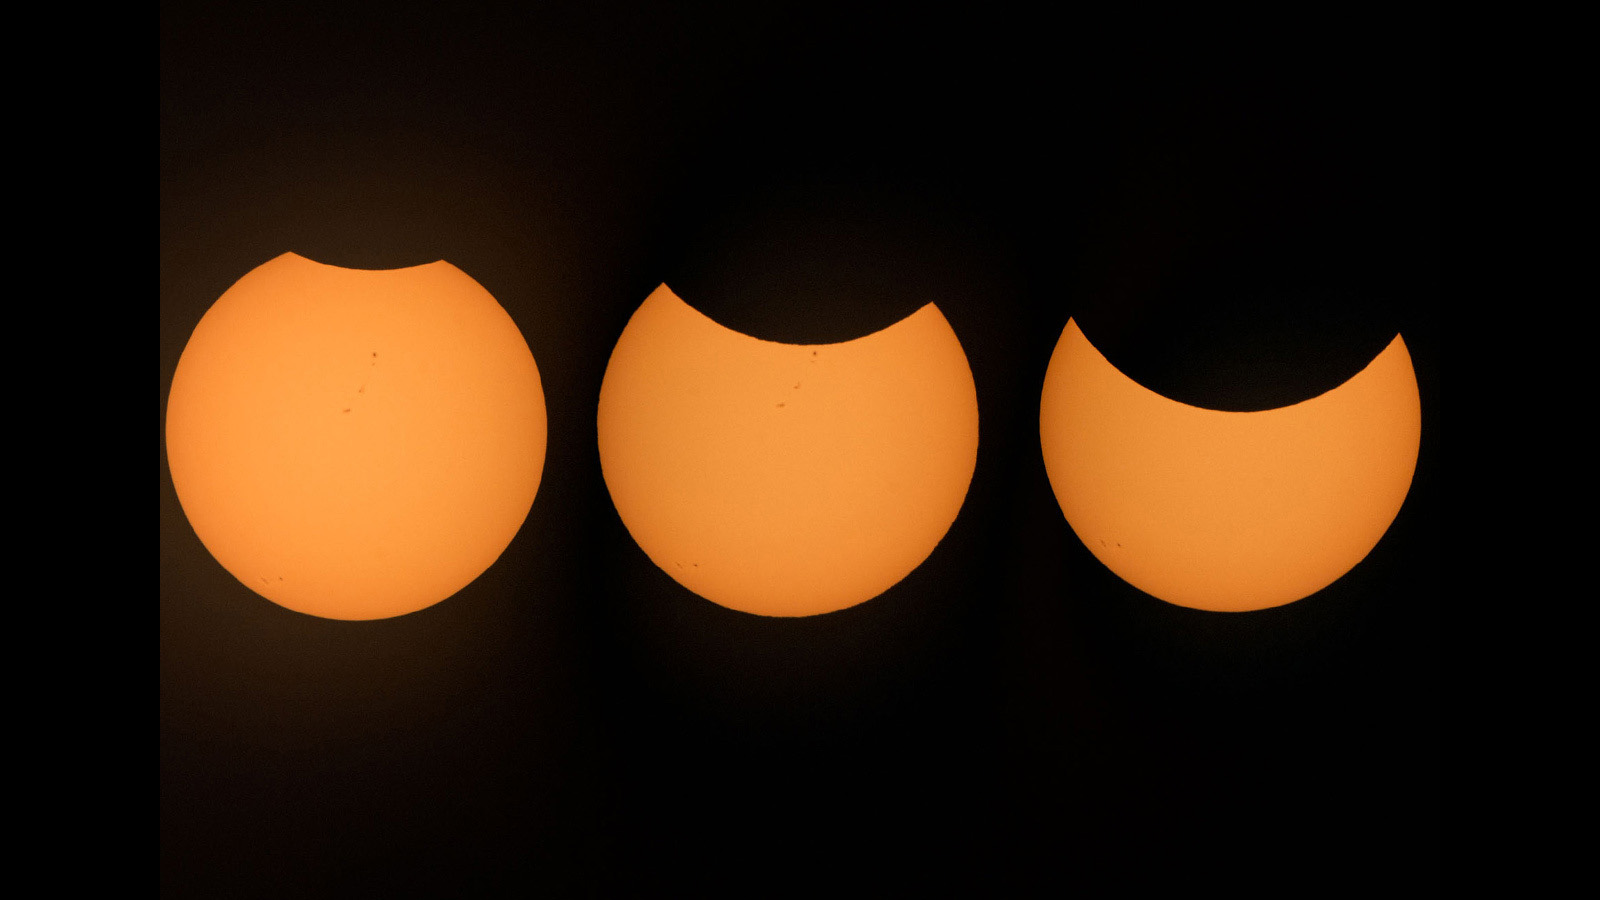 The Sun appears to have a small bite taken out of the top of its yellow-orange disk. The bite grows in size in this sequence of three images. 